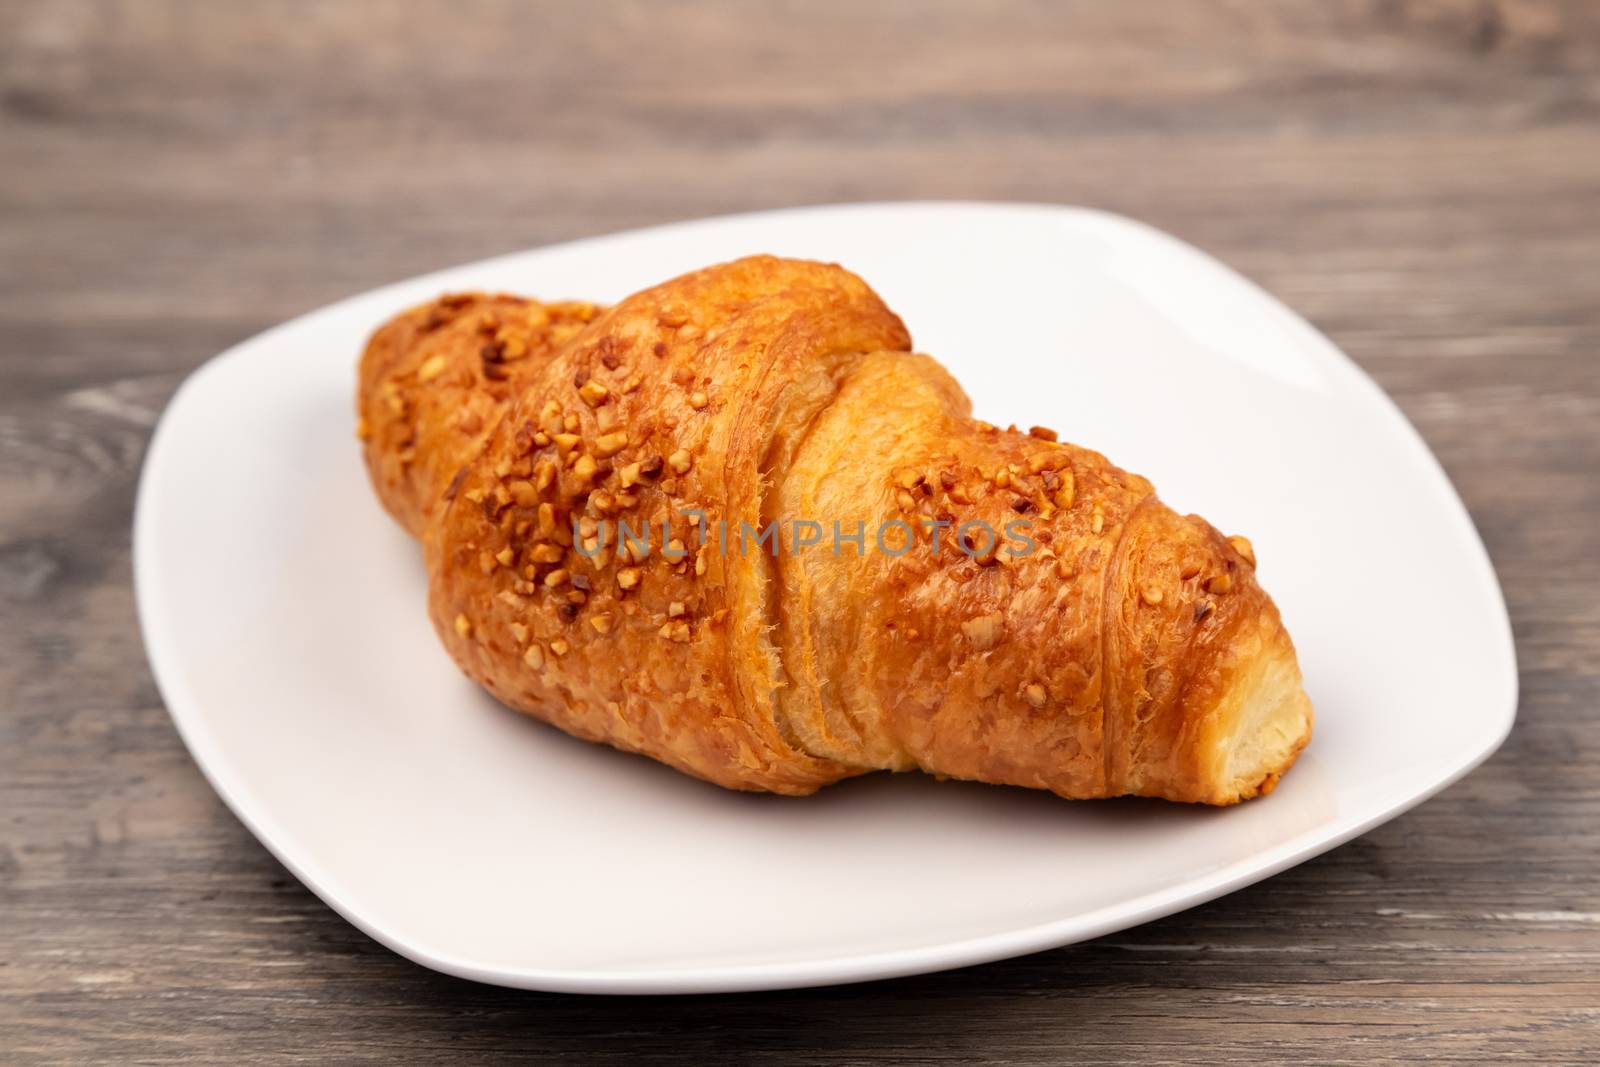 One delicious croissant on a plate